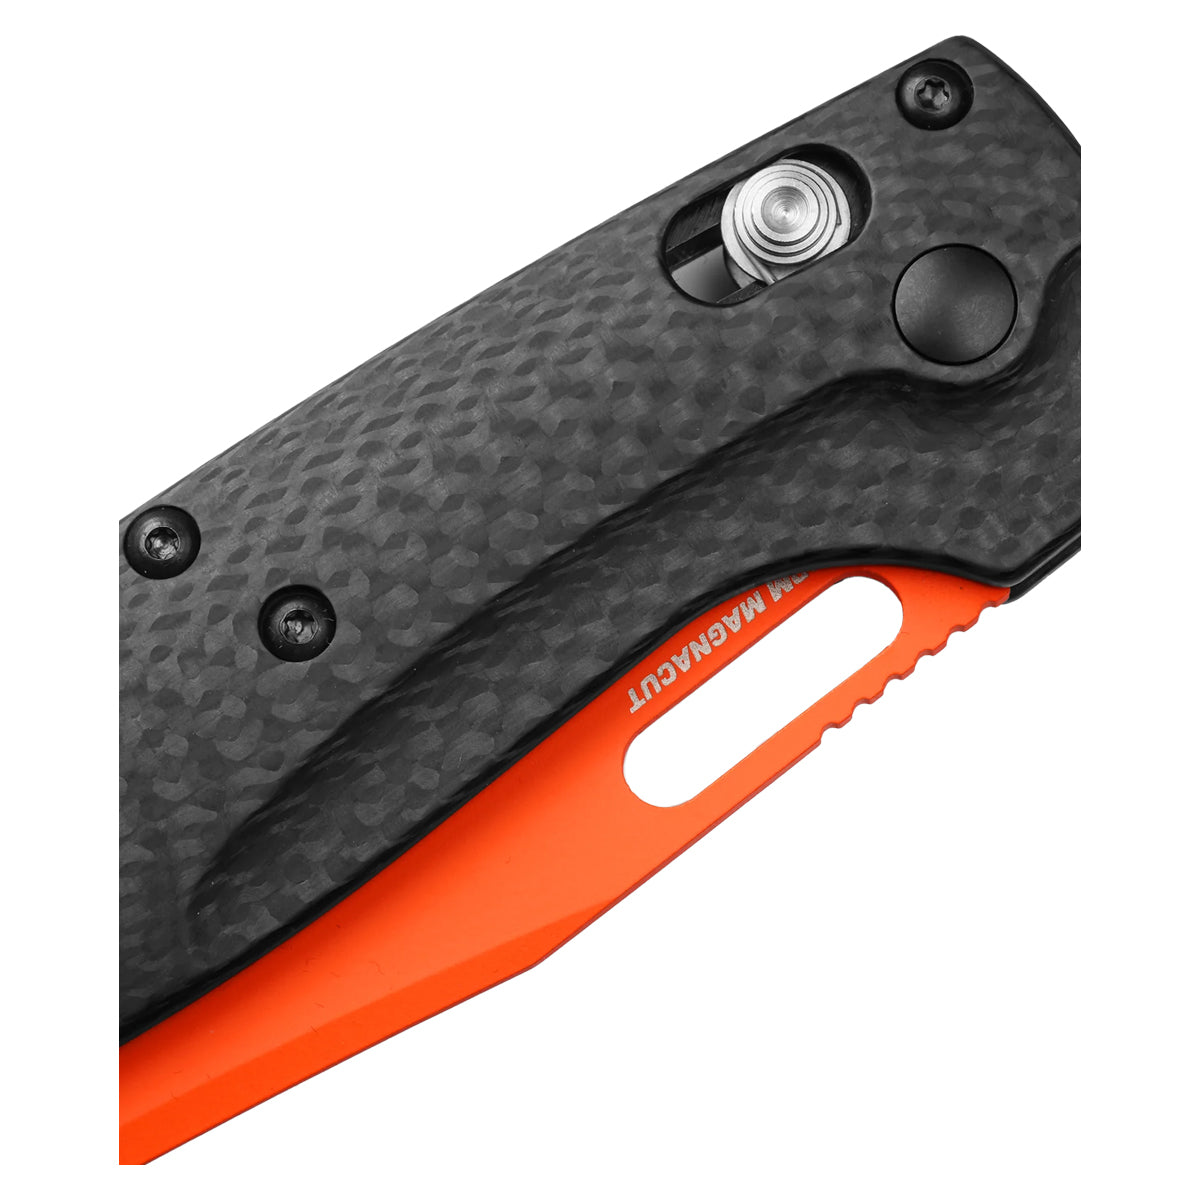 Benchmade 15535 OR-1 Tagged Out in  by GOHUNT | Benchmade - GOHUNT Shop